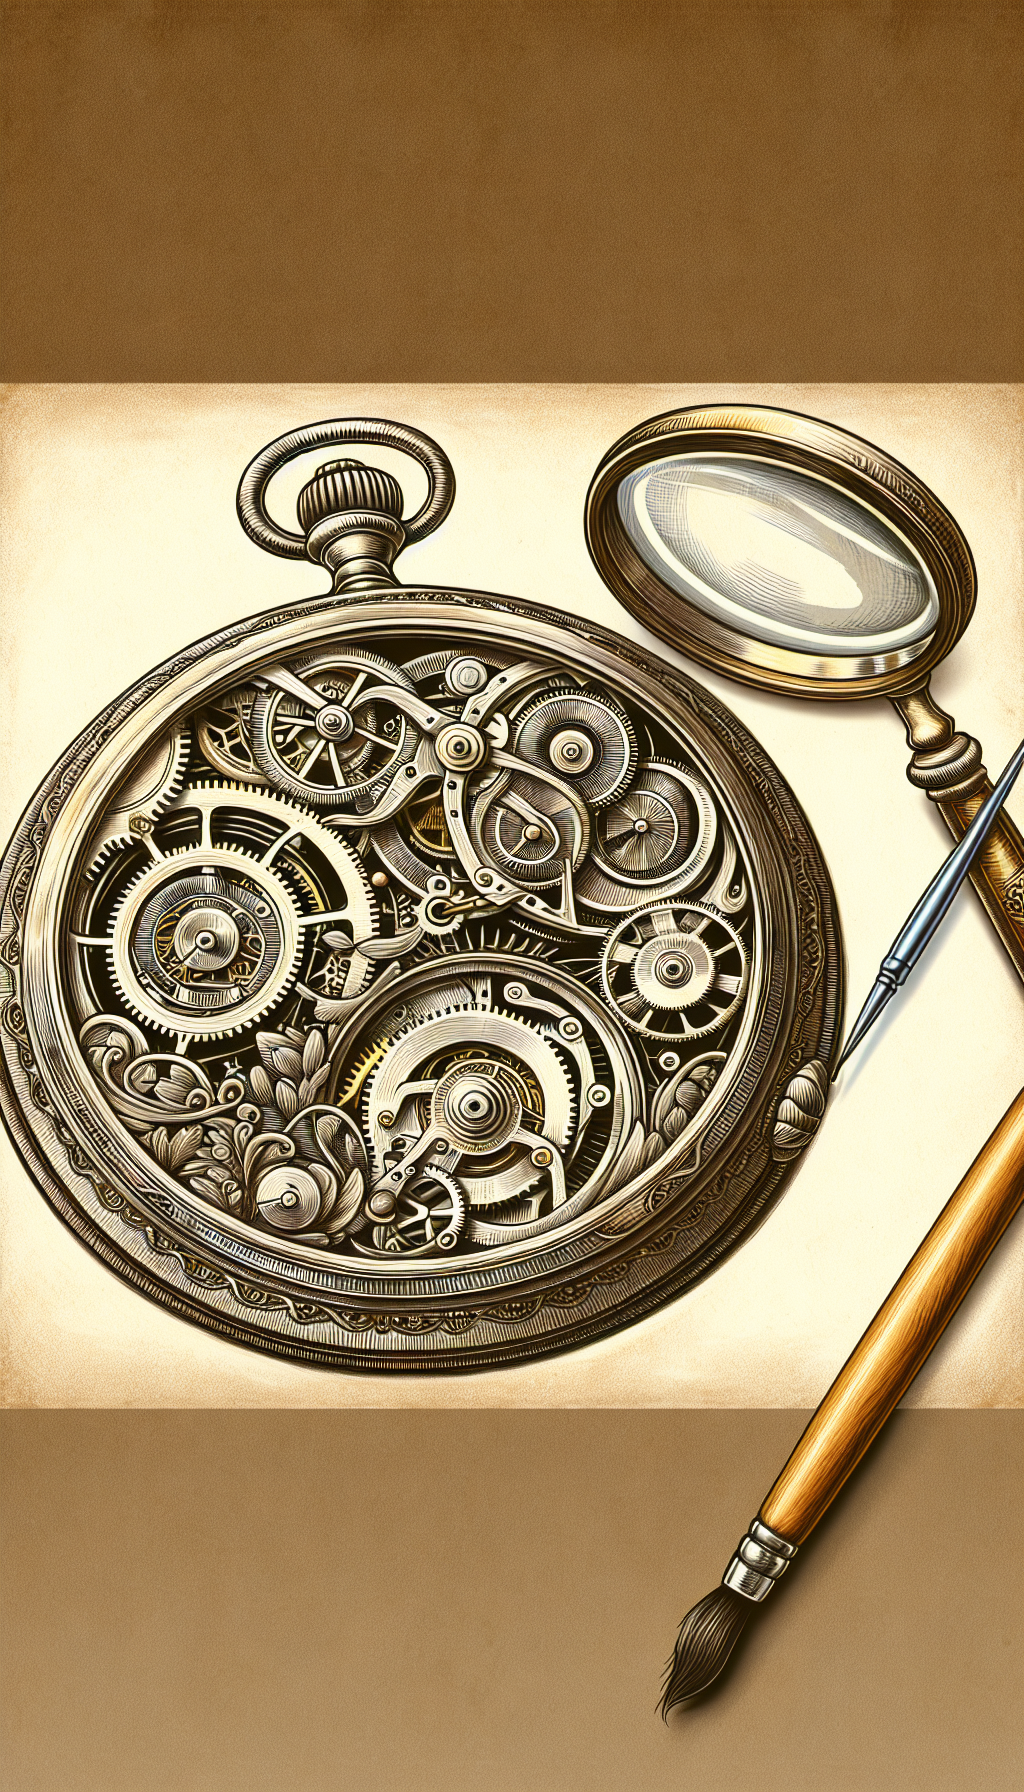 The illustration depicts an antique pocket watch with translucent gears revealing a timeline inside, where each gear is intricately etched with key design features from different eras, such as Art Nouveau swirls or Victorian filigree. A magnifying glass hovers above, focusing on an emblematic detail to symbolize identification, while stylistic brushstrokes transition between periods across the watch's surface.